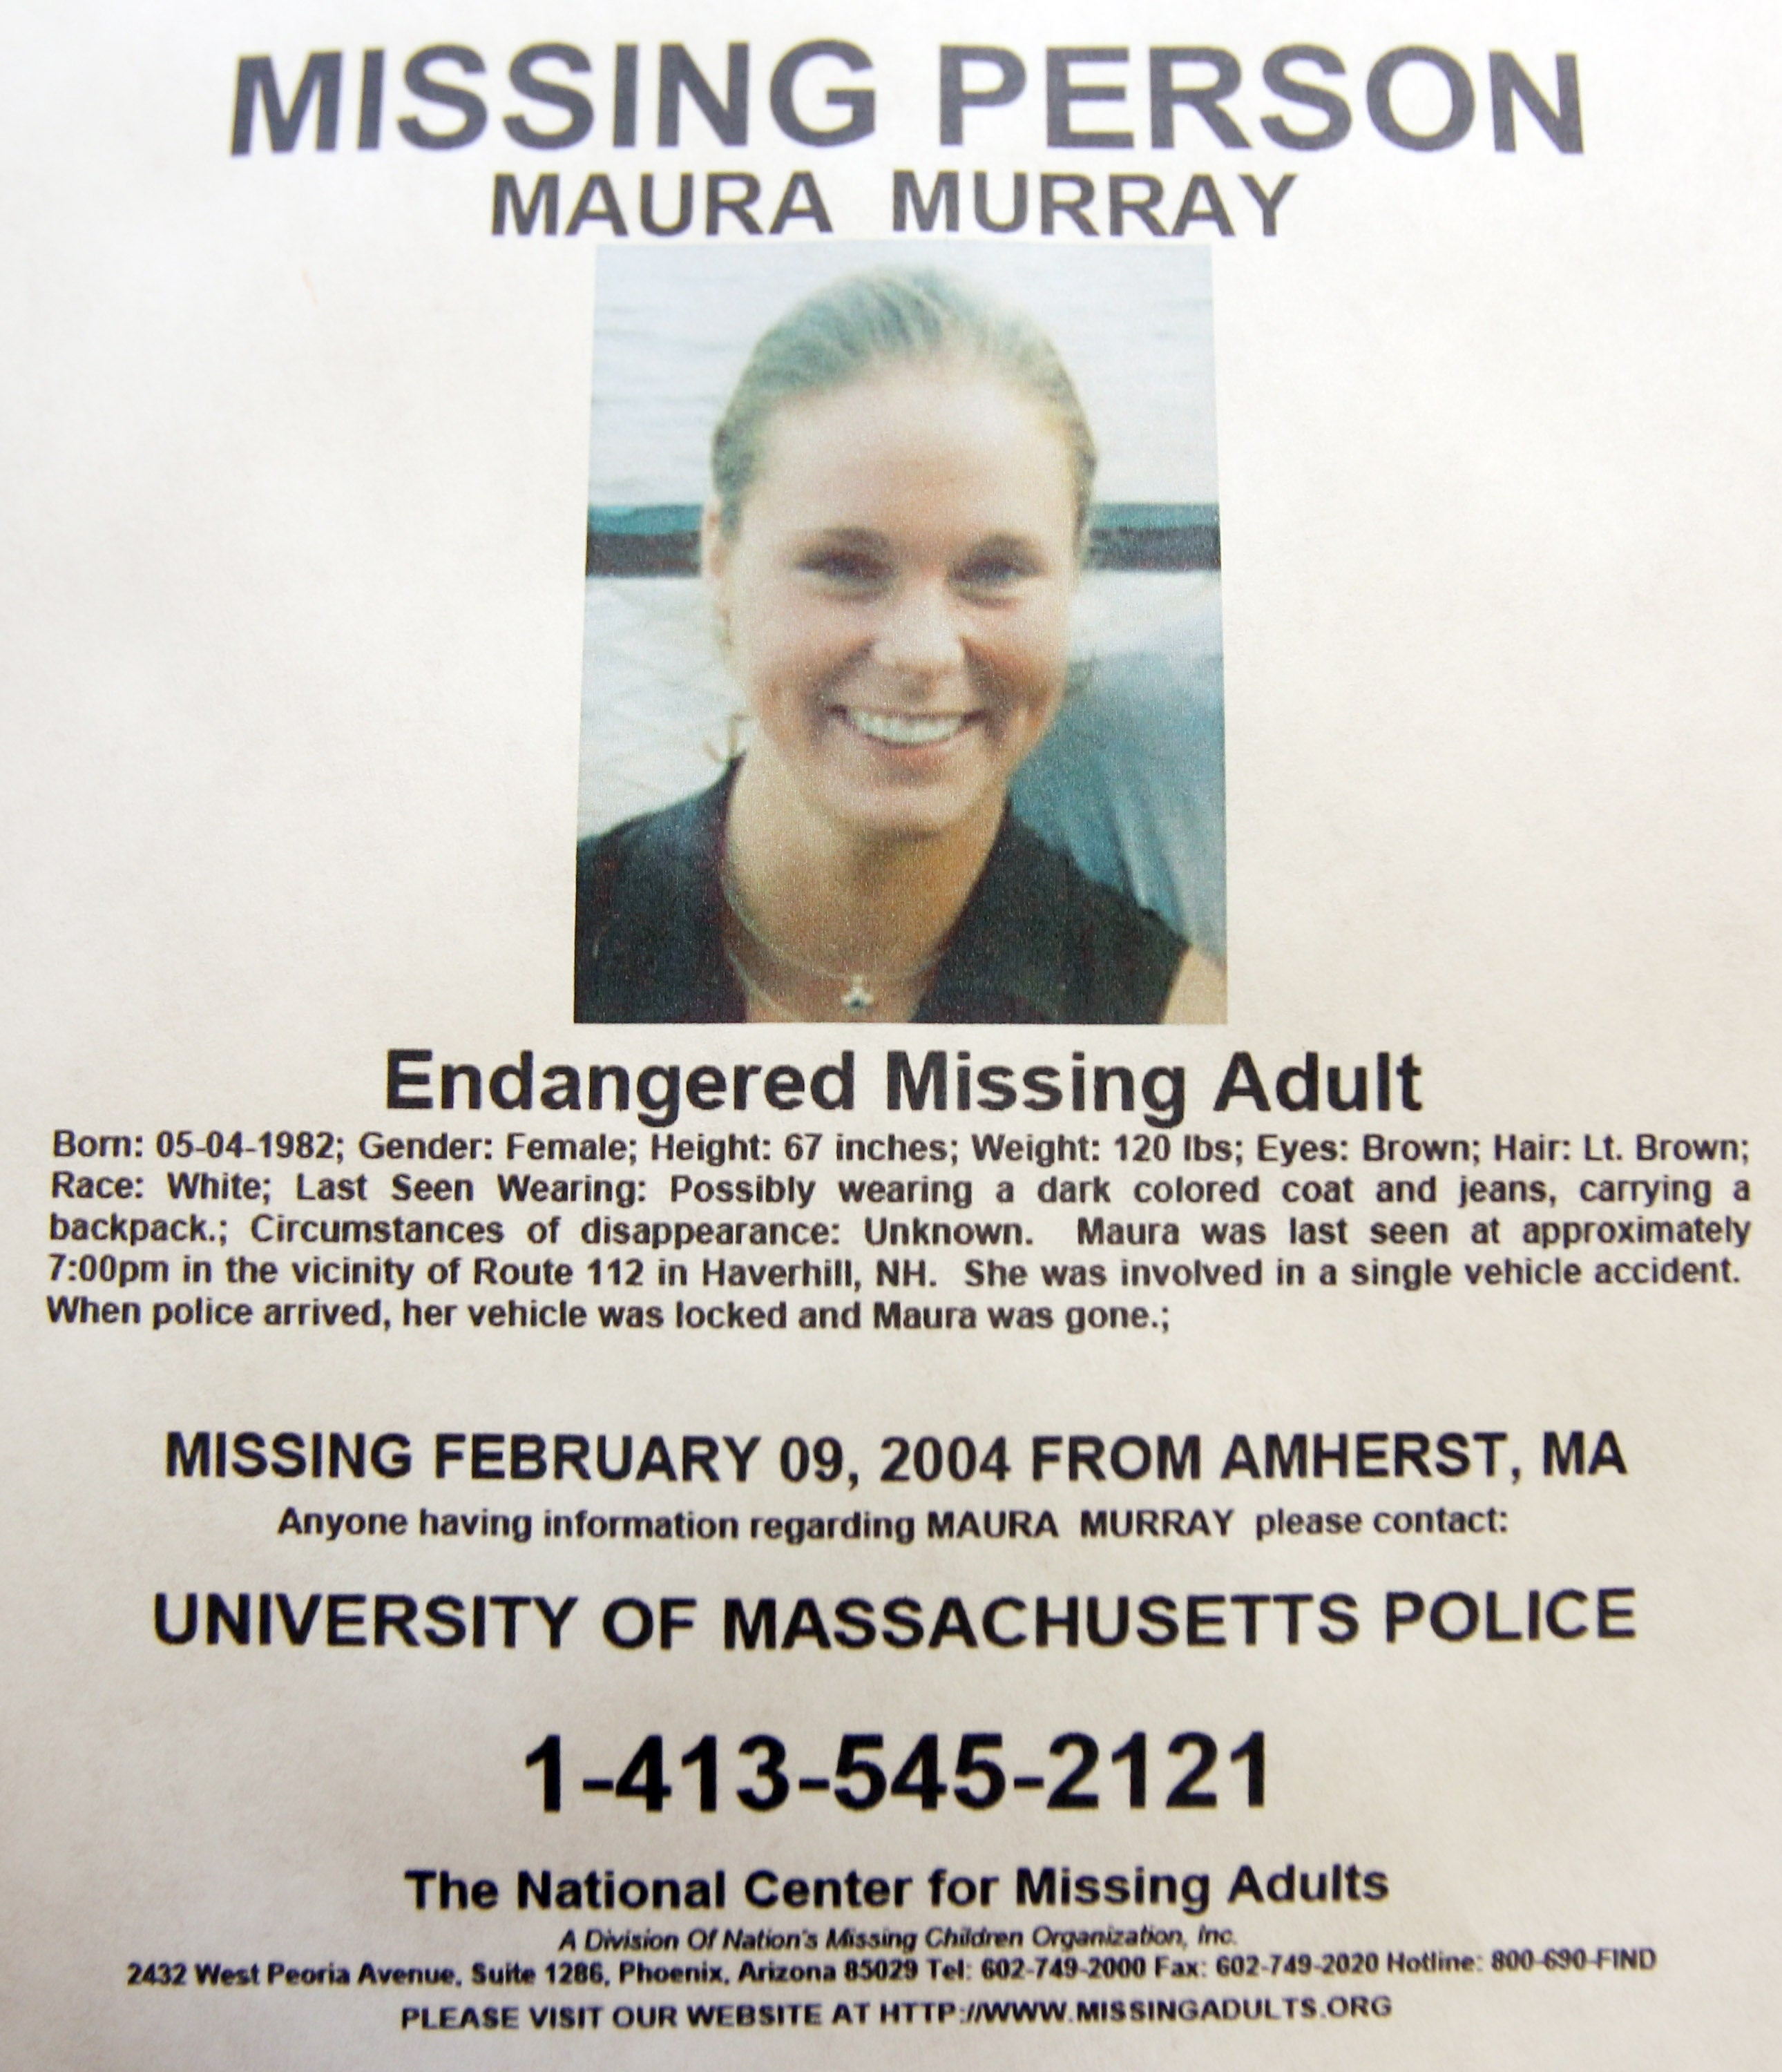 Maura Murray went missing in February 2004 – the case remains unsolved and open